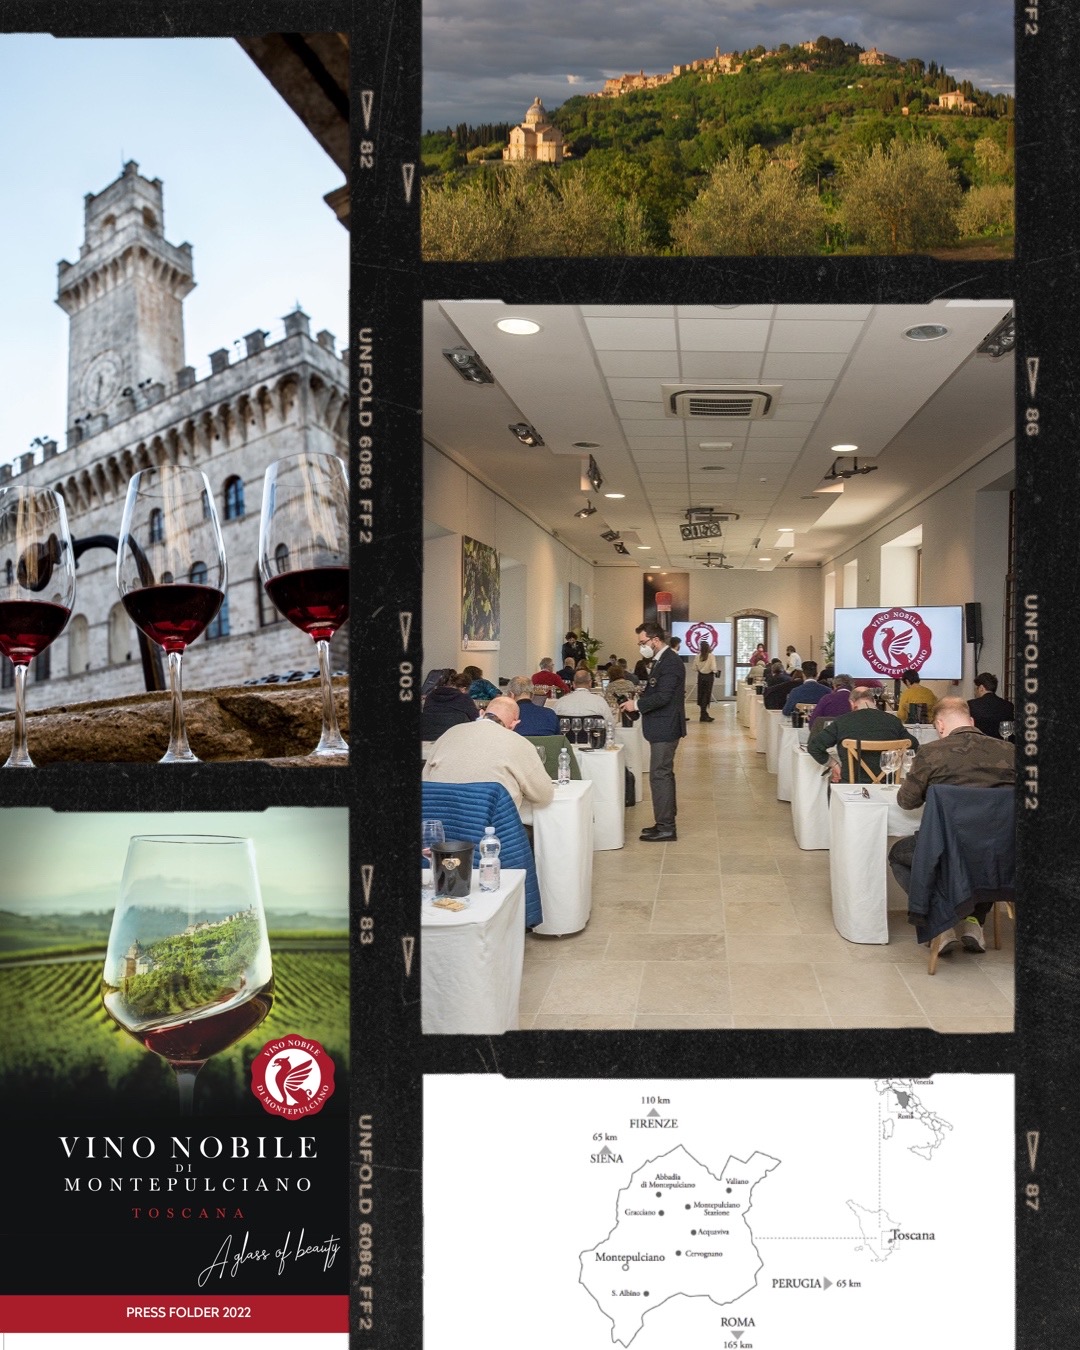 Anteprima Vino Nobile di Montepulciano 2022 – an immersive experience in one of the most ancient red wine zones of Tuscany – Filippo Magnani